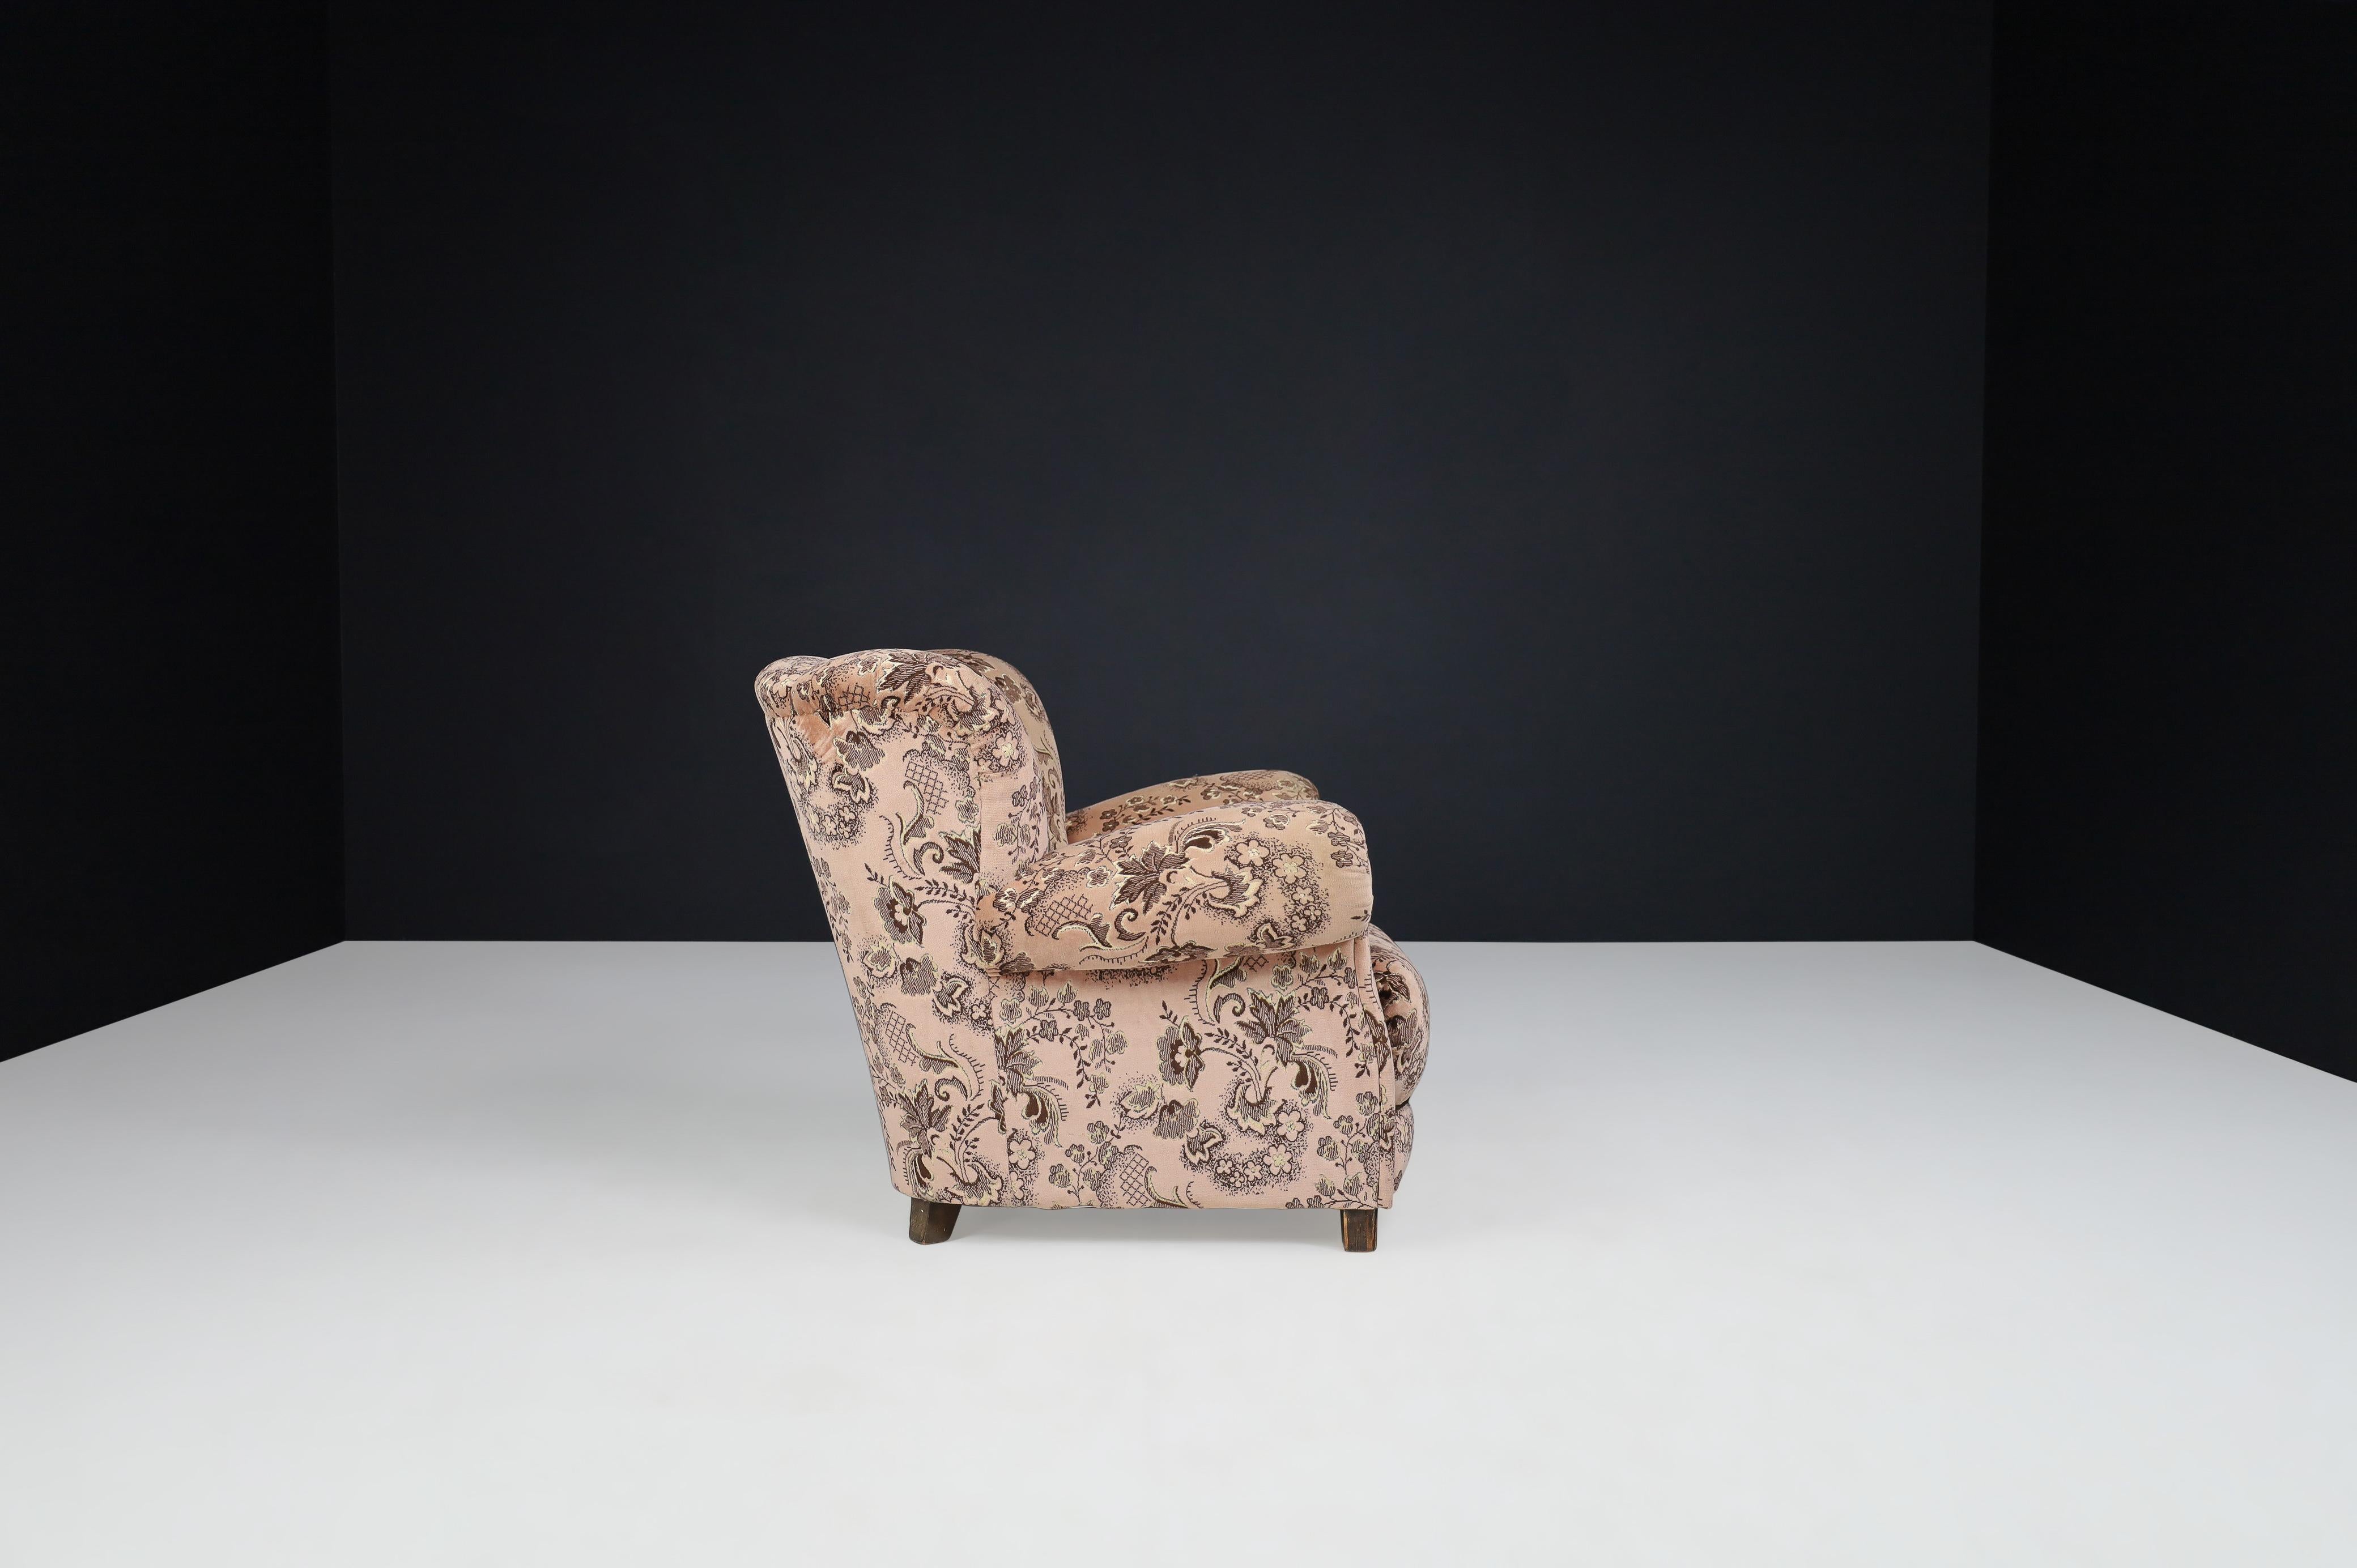 20th Century Art Deco Lounge Chair in Floral Fabric Prague, 1930s For Sale